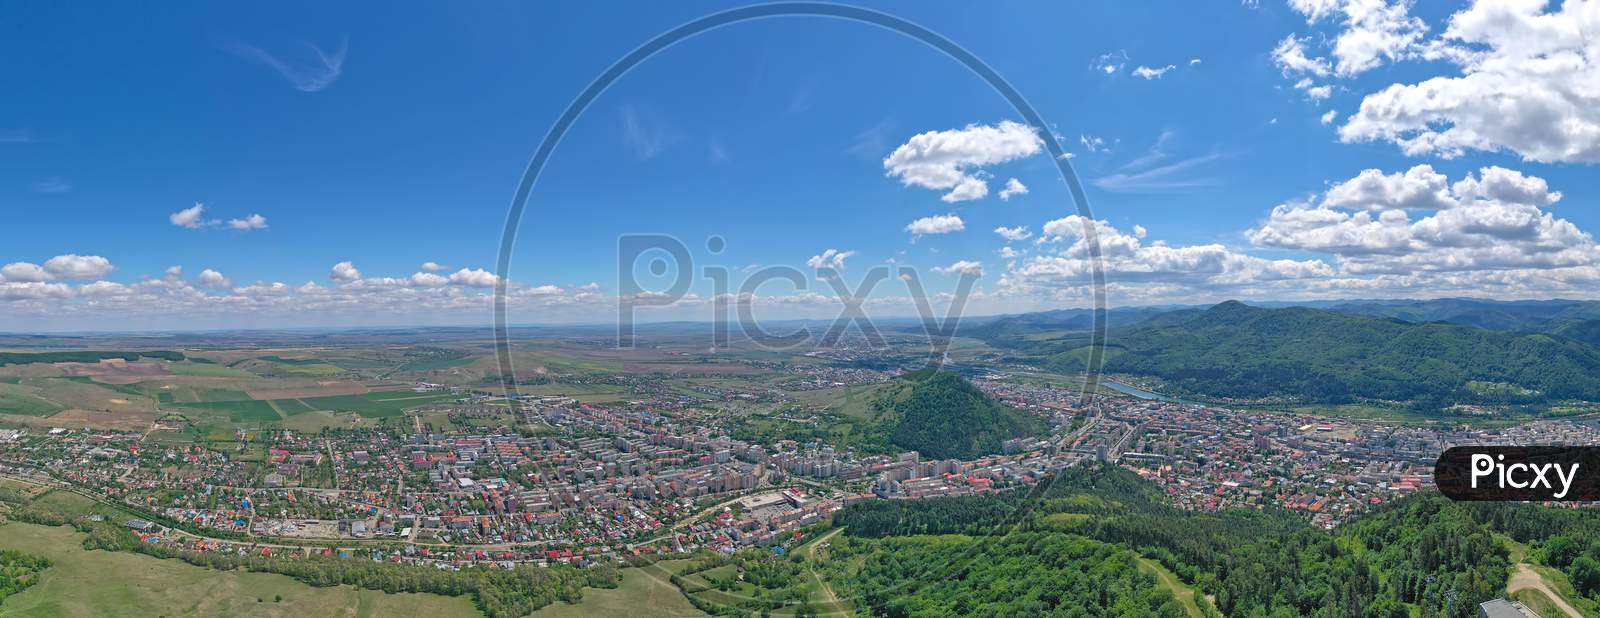 Summer City Panorama, Aerial View